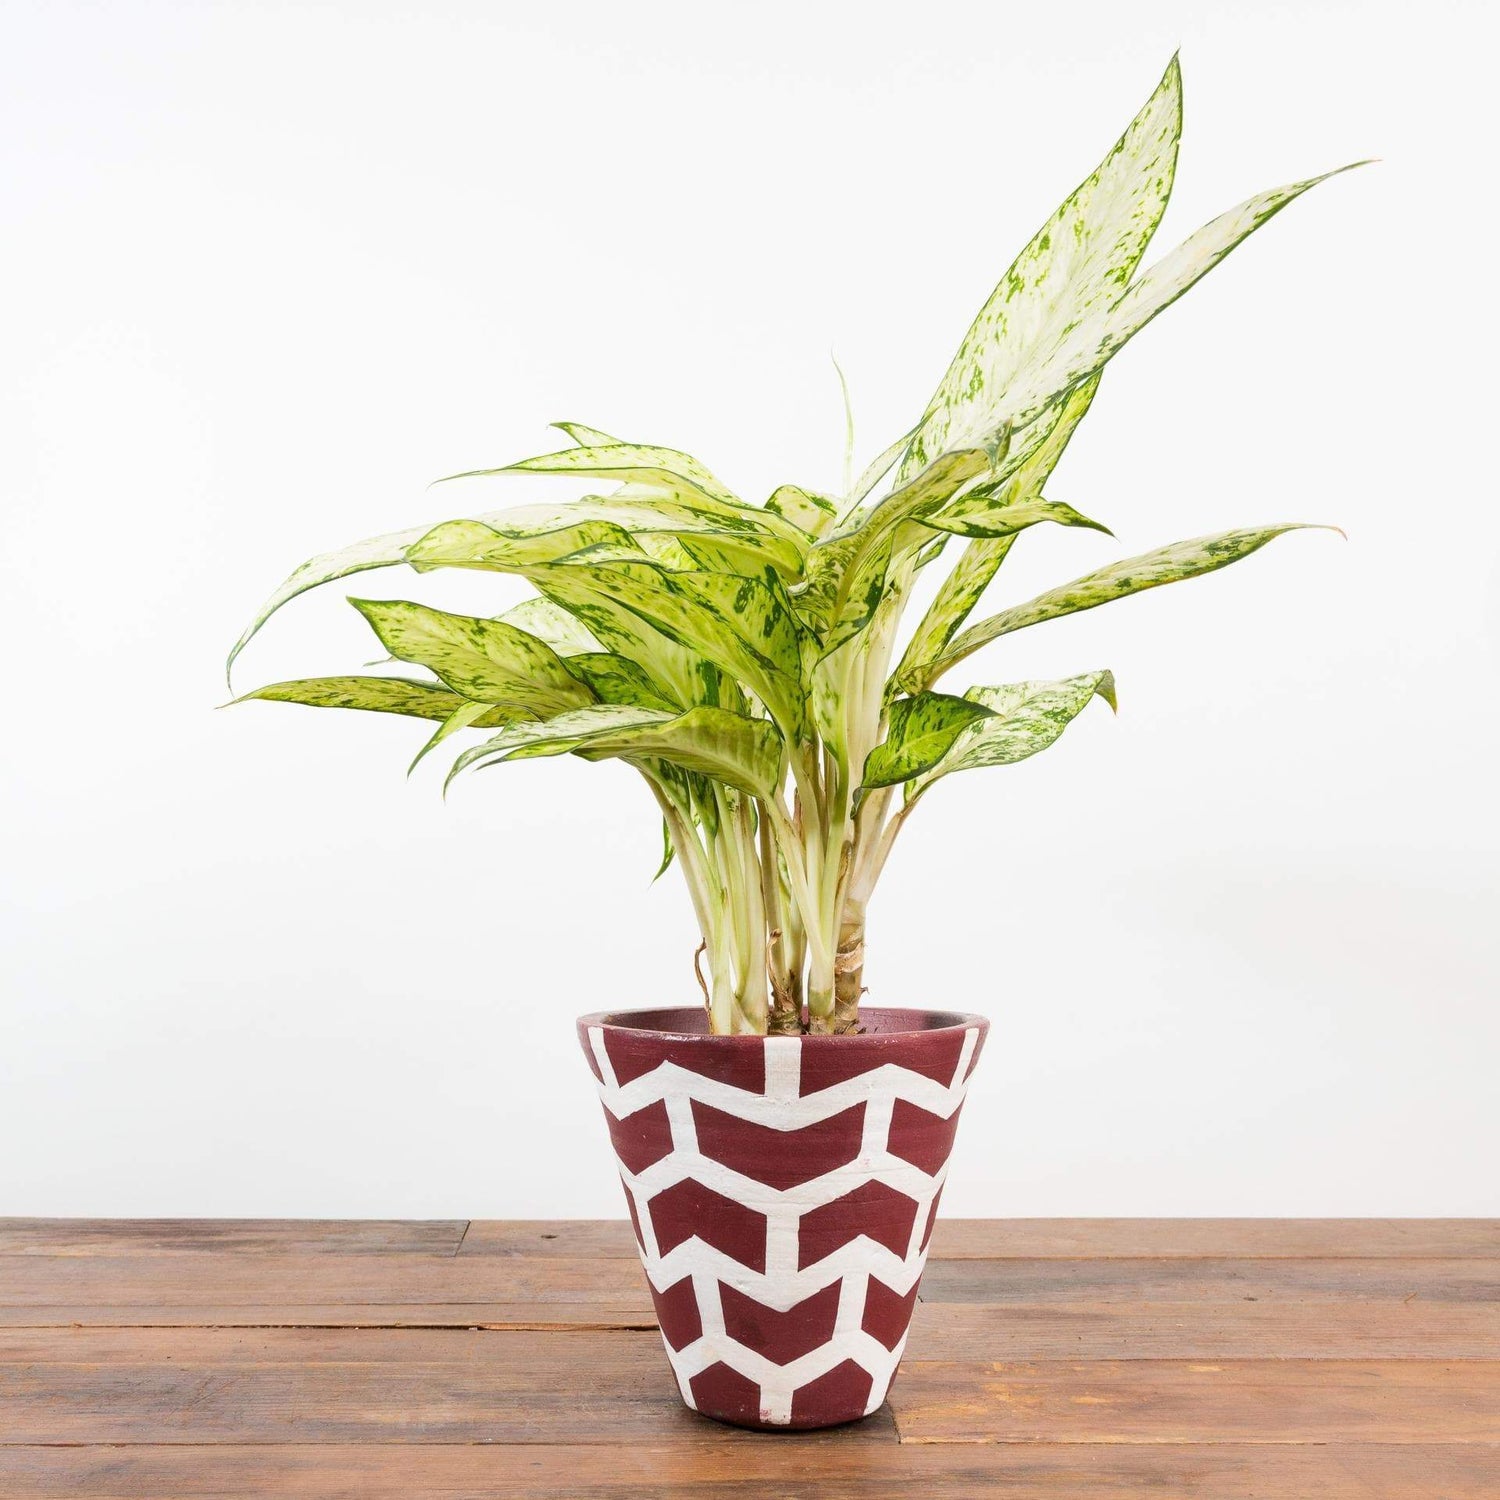 Dumb Cane 'Star Bright' - Urban Sprouts